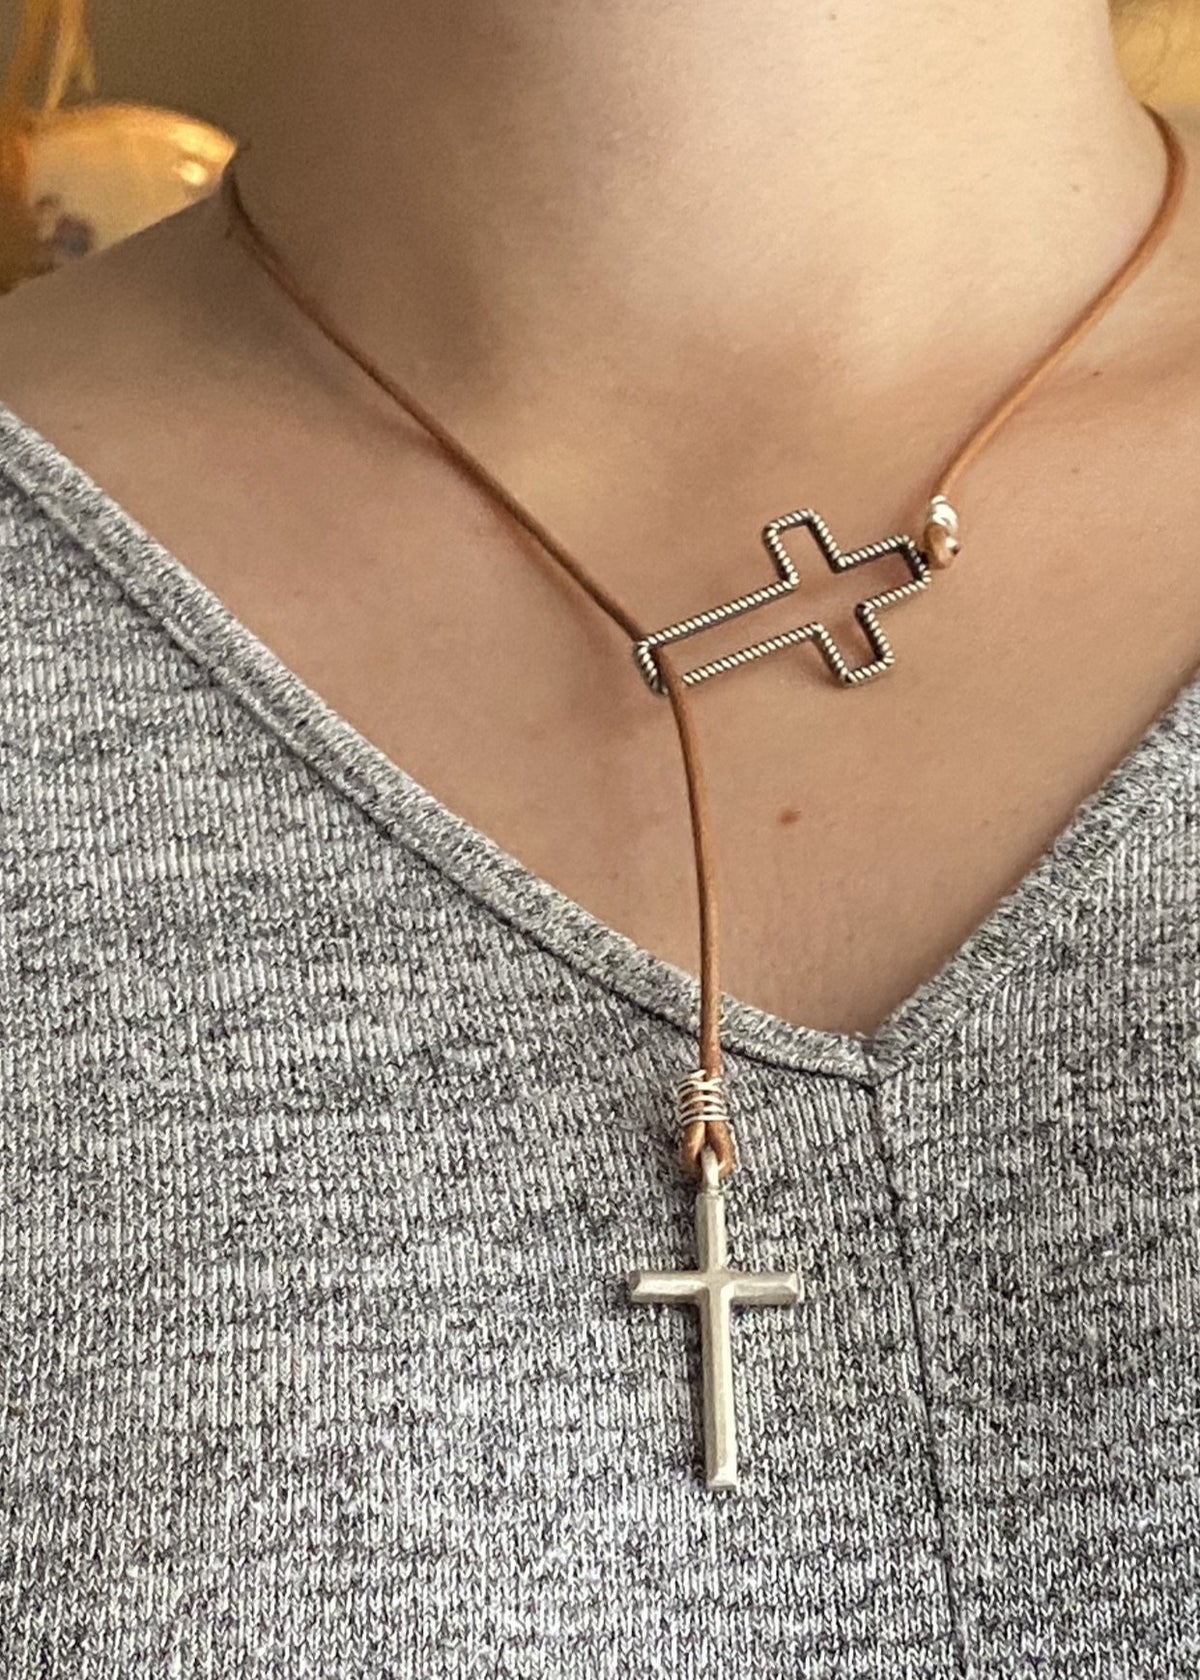 Lariat Silver cross necklace, 2 large silver crosses with brown leather cord